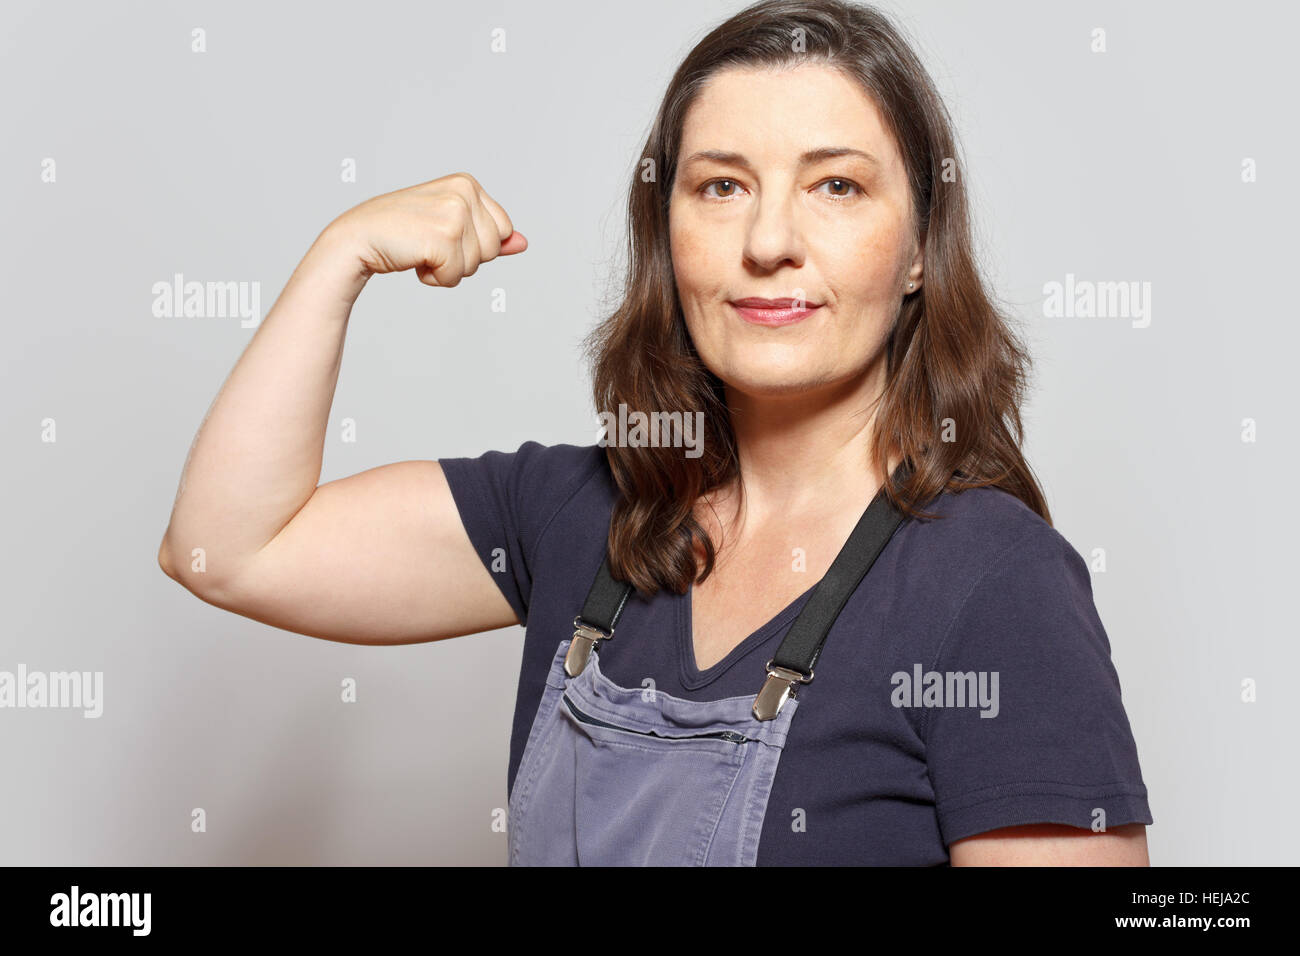 Middle aged and self-confident woman in dungarees flexing her biceps muscles, sign for assertiveness, light gray background Stock Photo